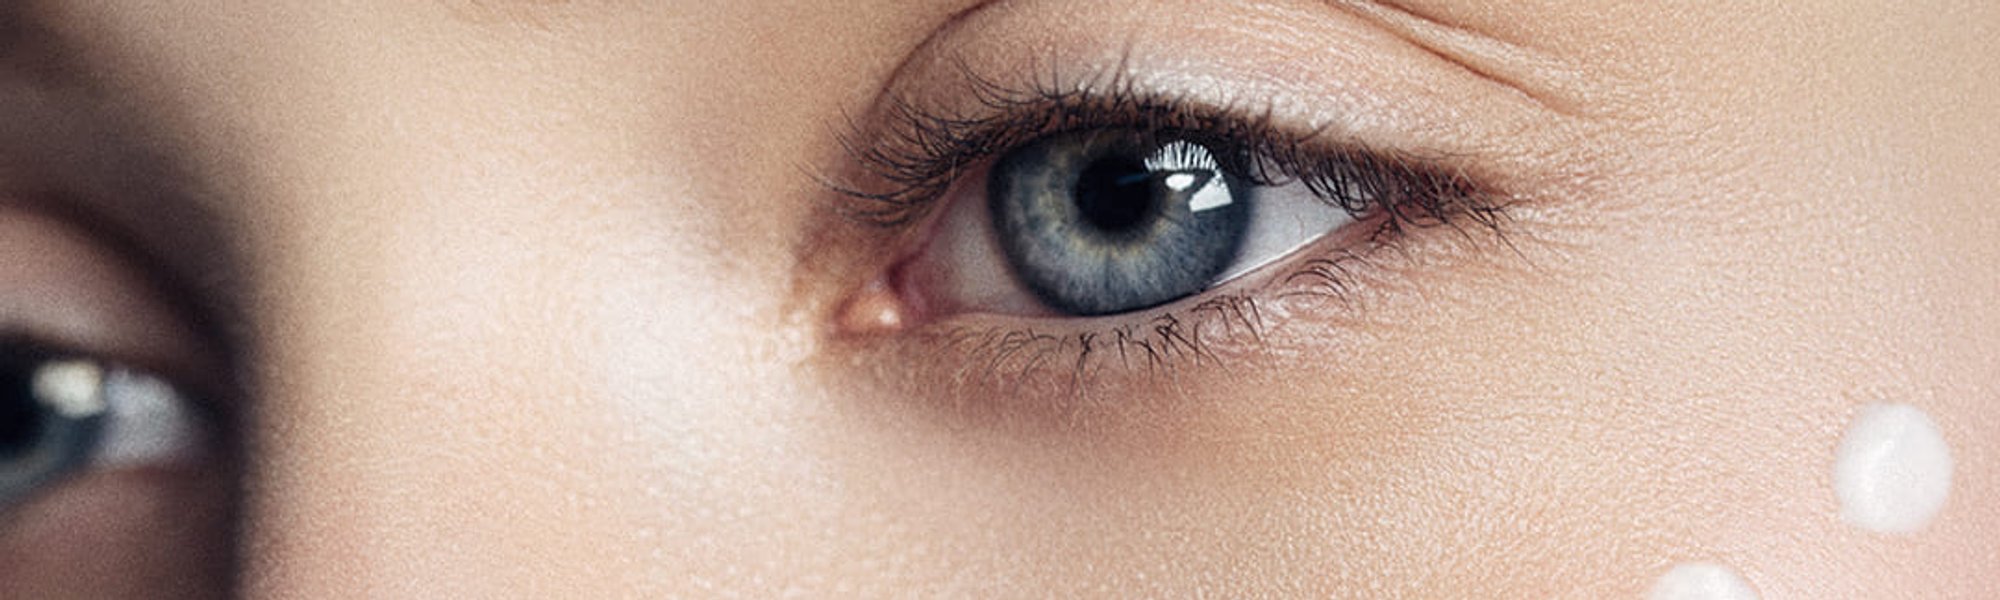 Learn How To Get Rid Of Dark Circles And Bags 1080x476